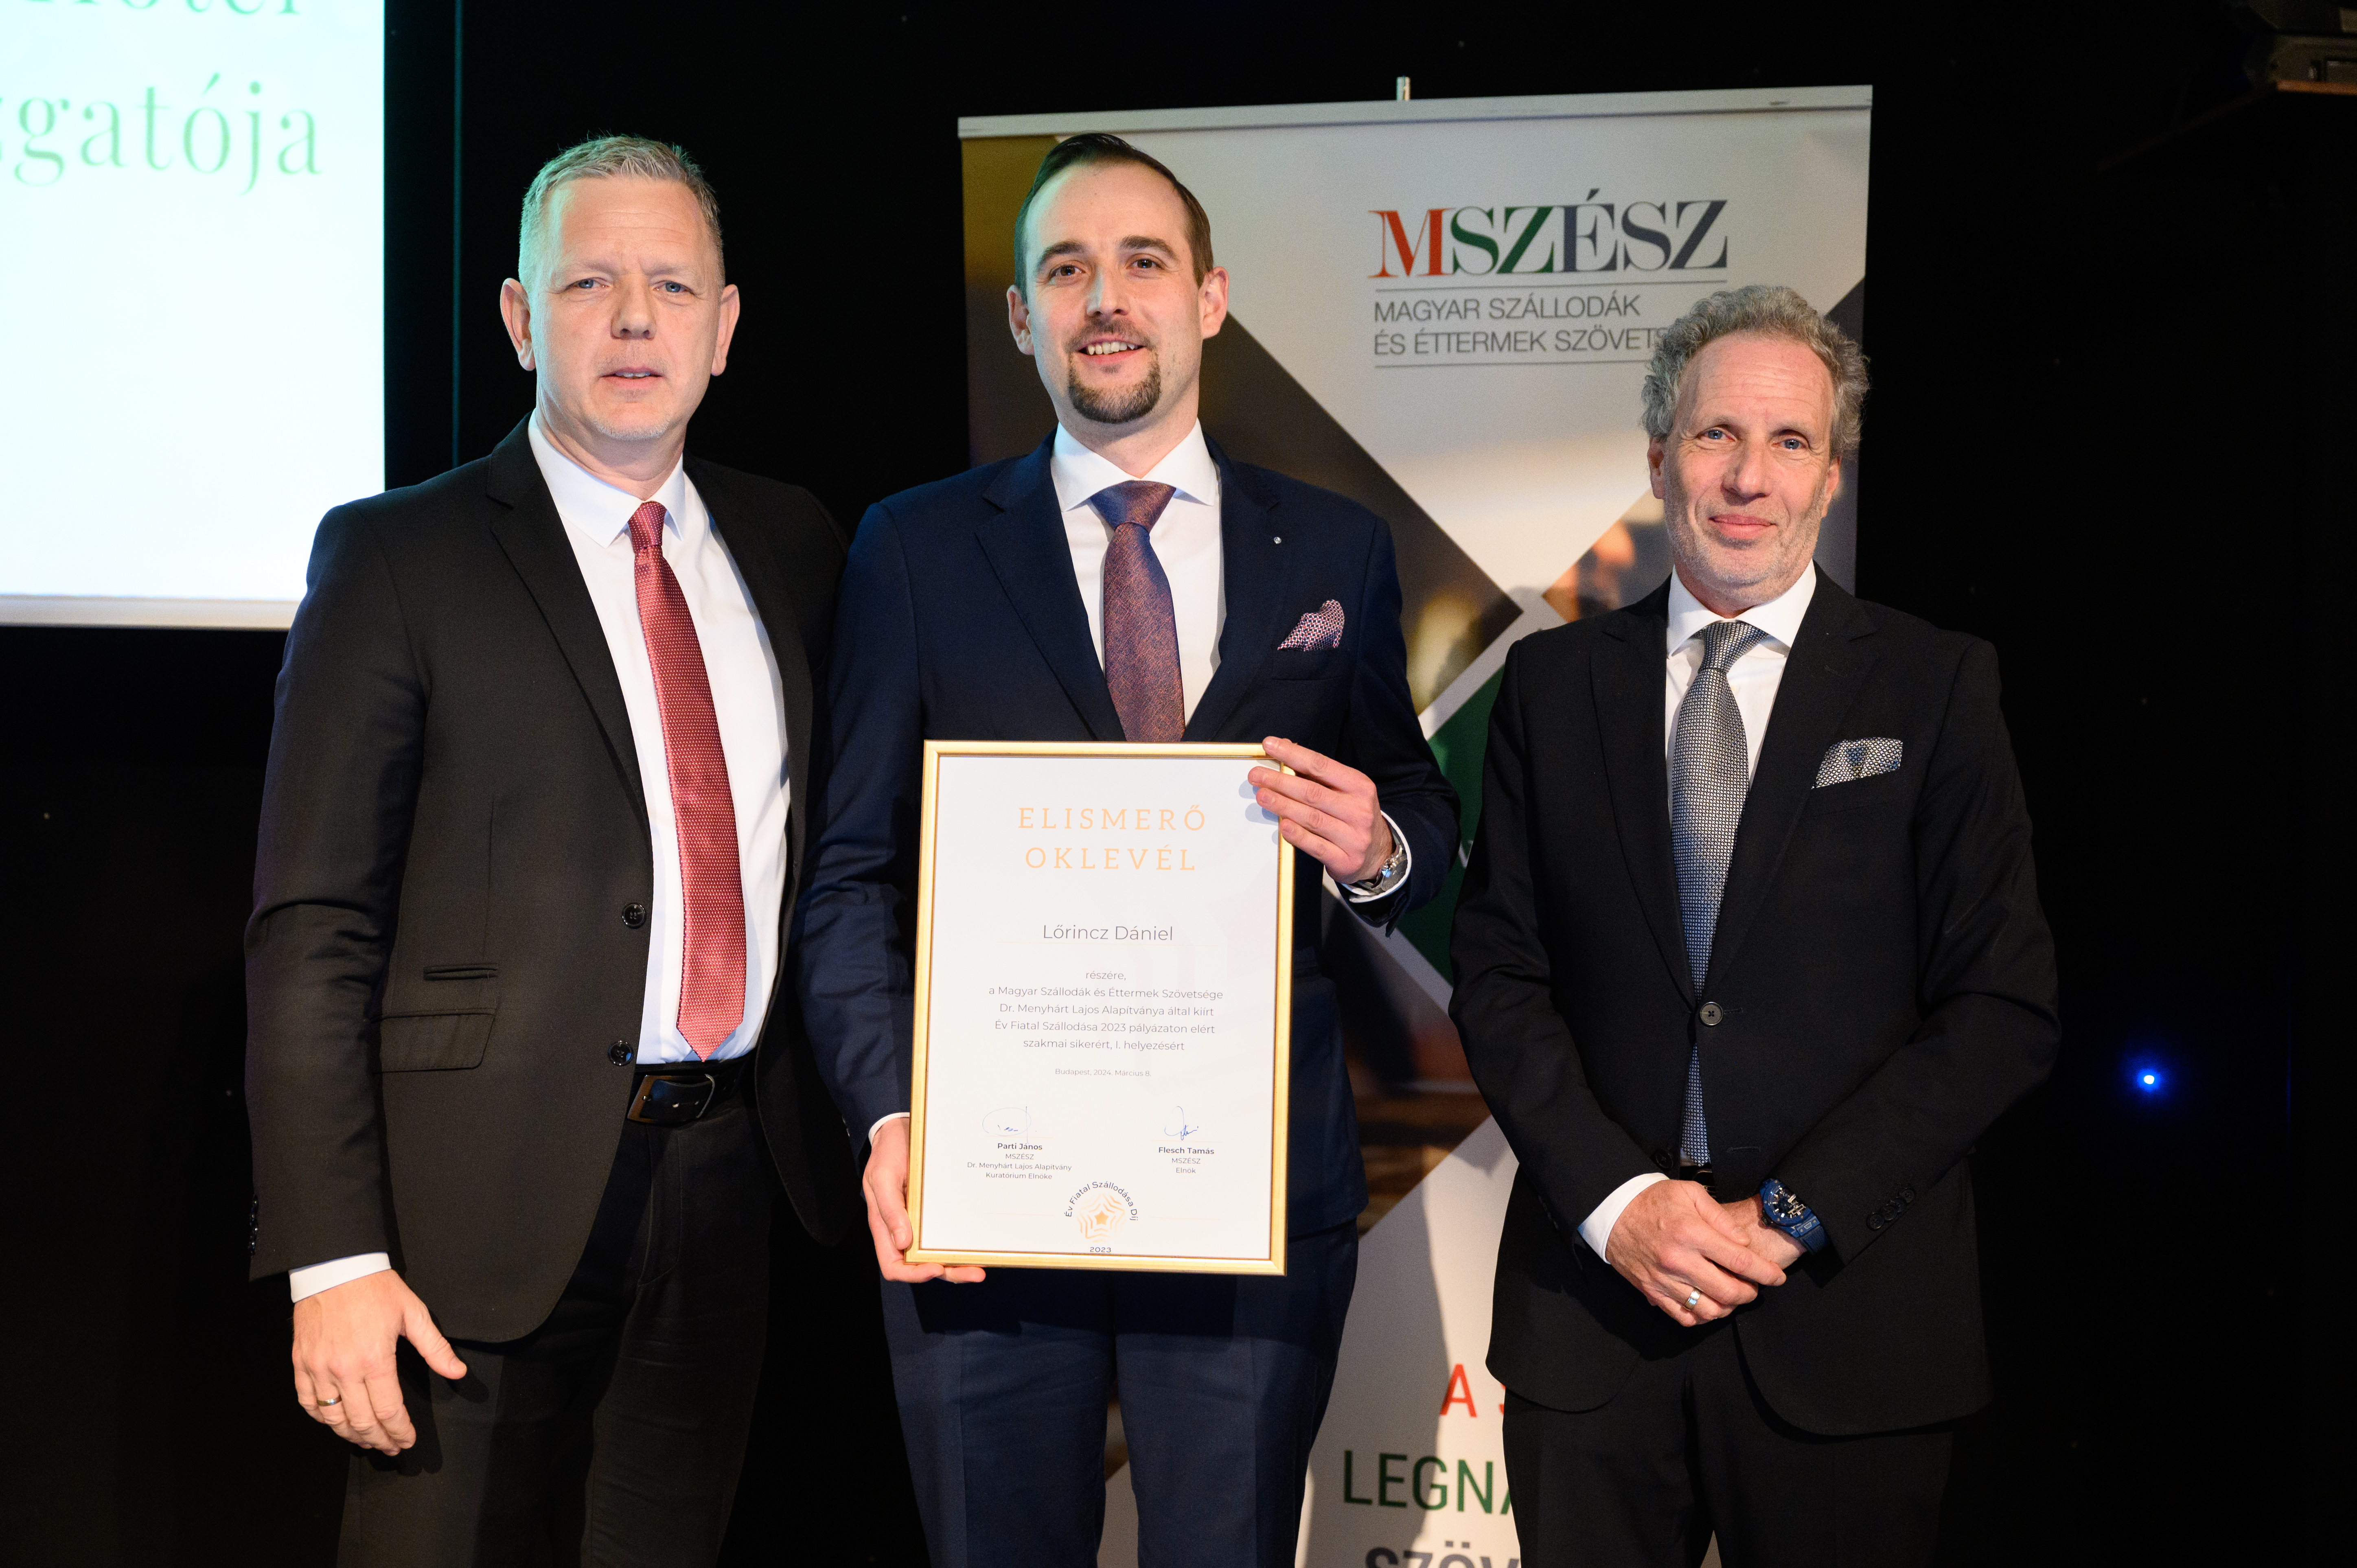 Dániel Lőrincz Wins Young Hotelier of the Year